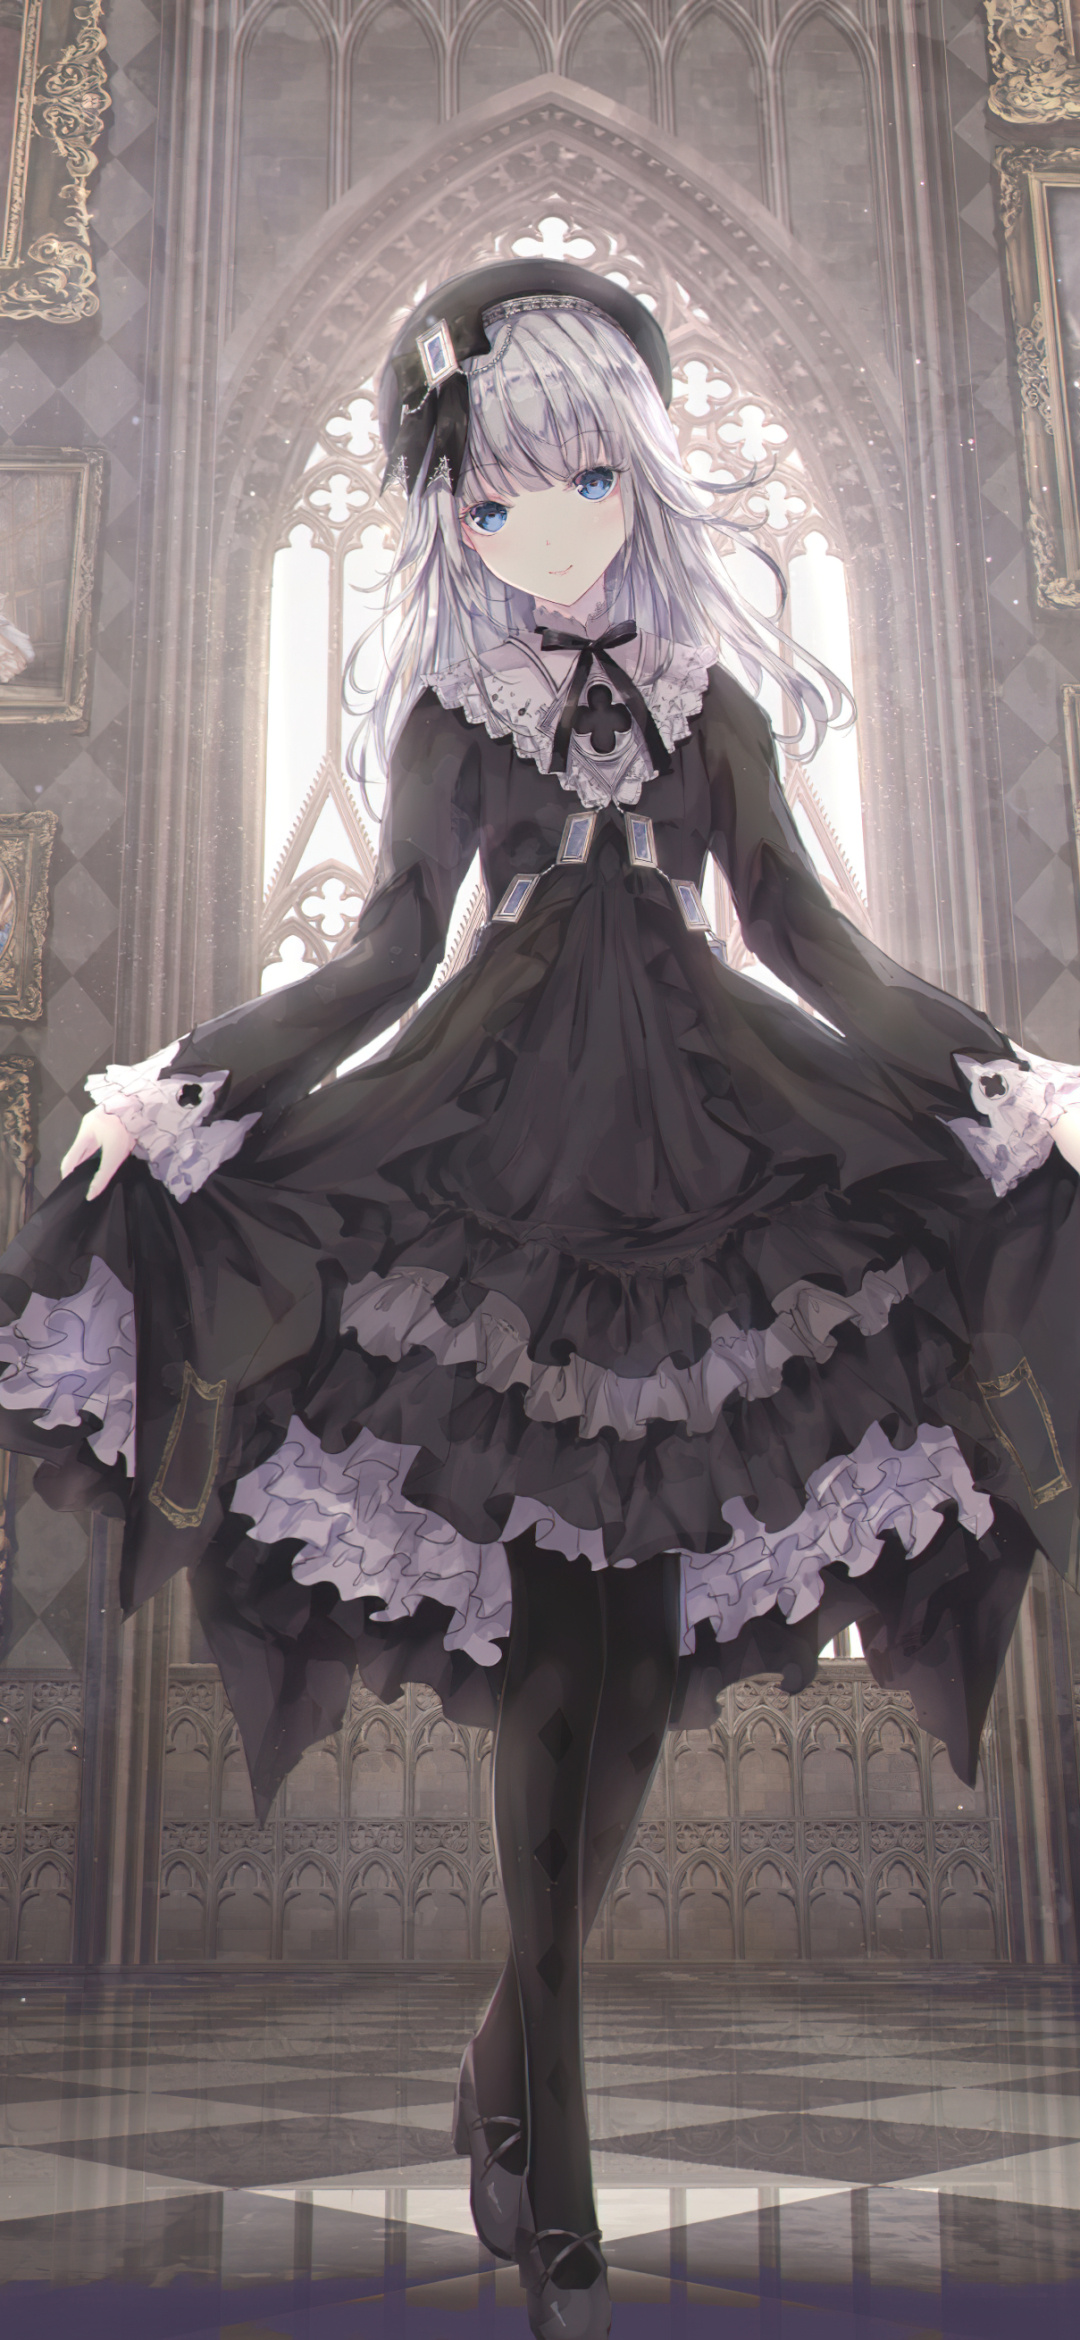 Gothic Anime: Victorian dress, Gothic Lolita fashion, Temple, Medieval period, Subculture. 1080x2340 HD Wallpaper.